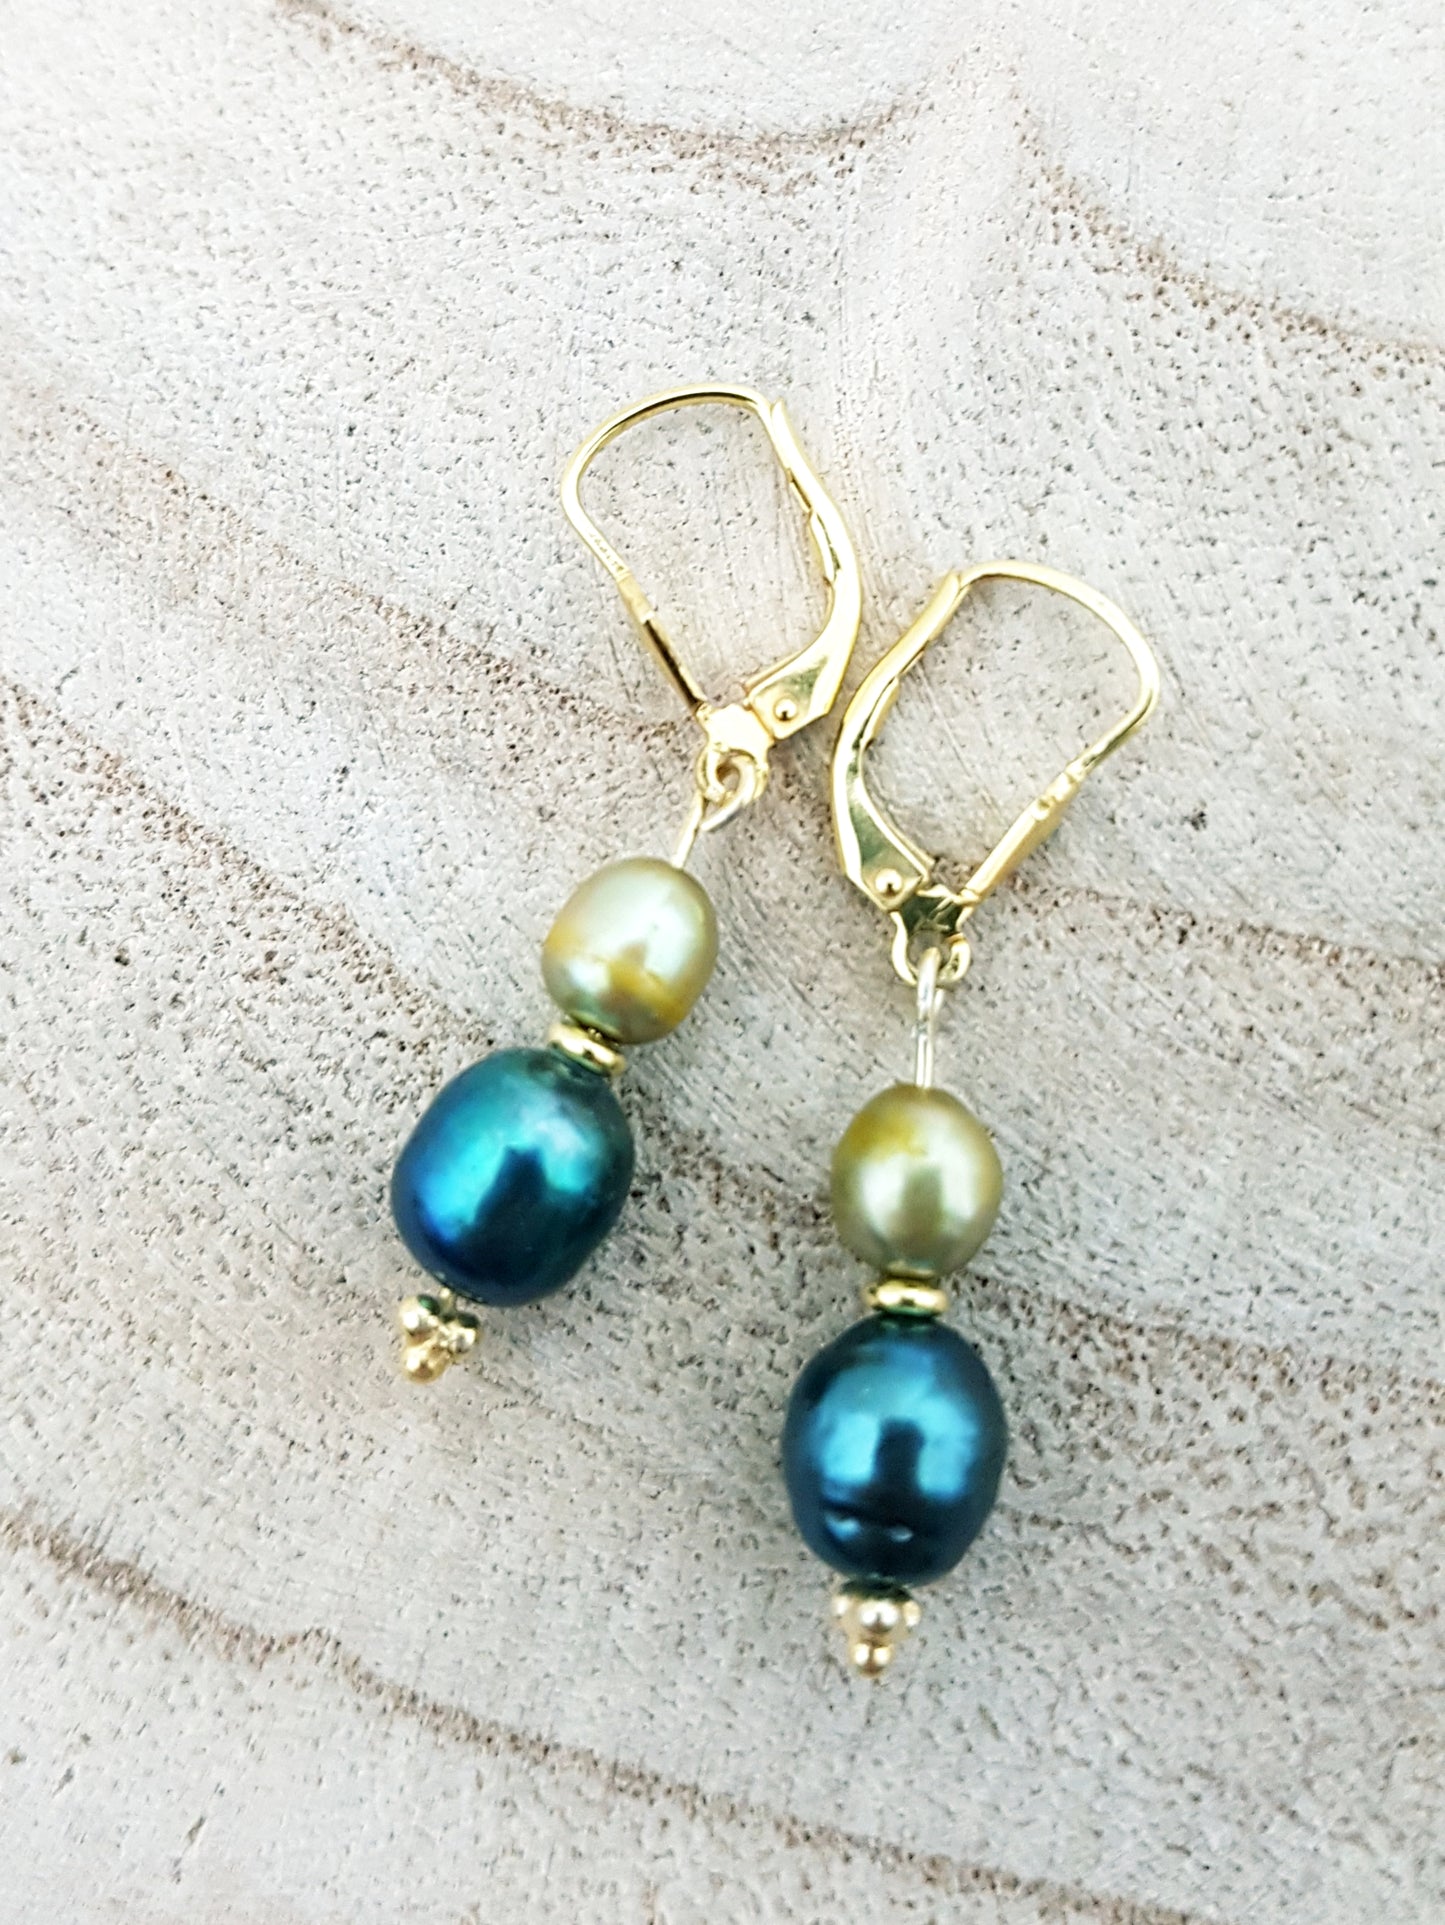 Ace of Cups Jewellery Pearl earrings/olive green, blue